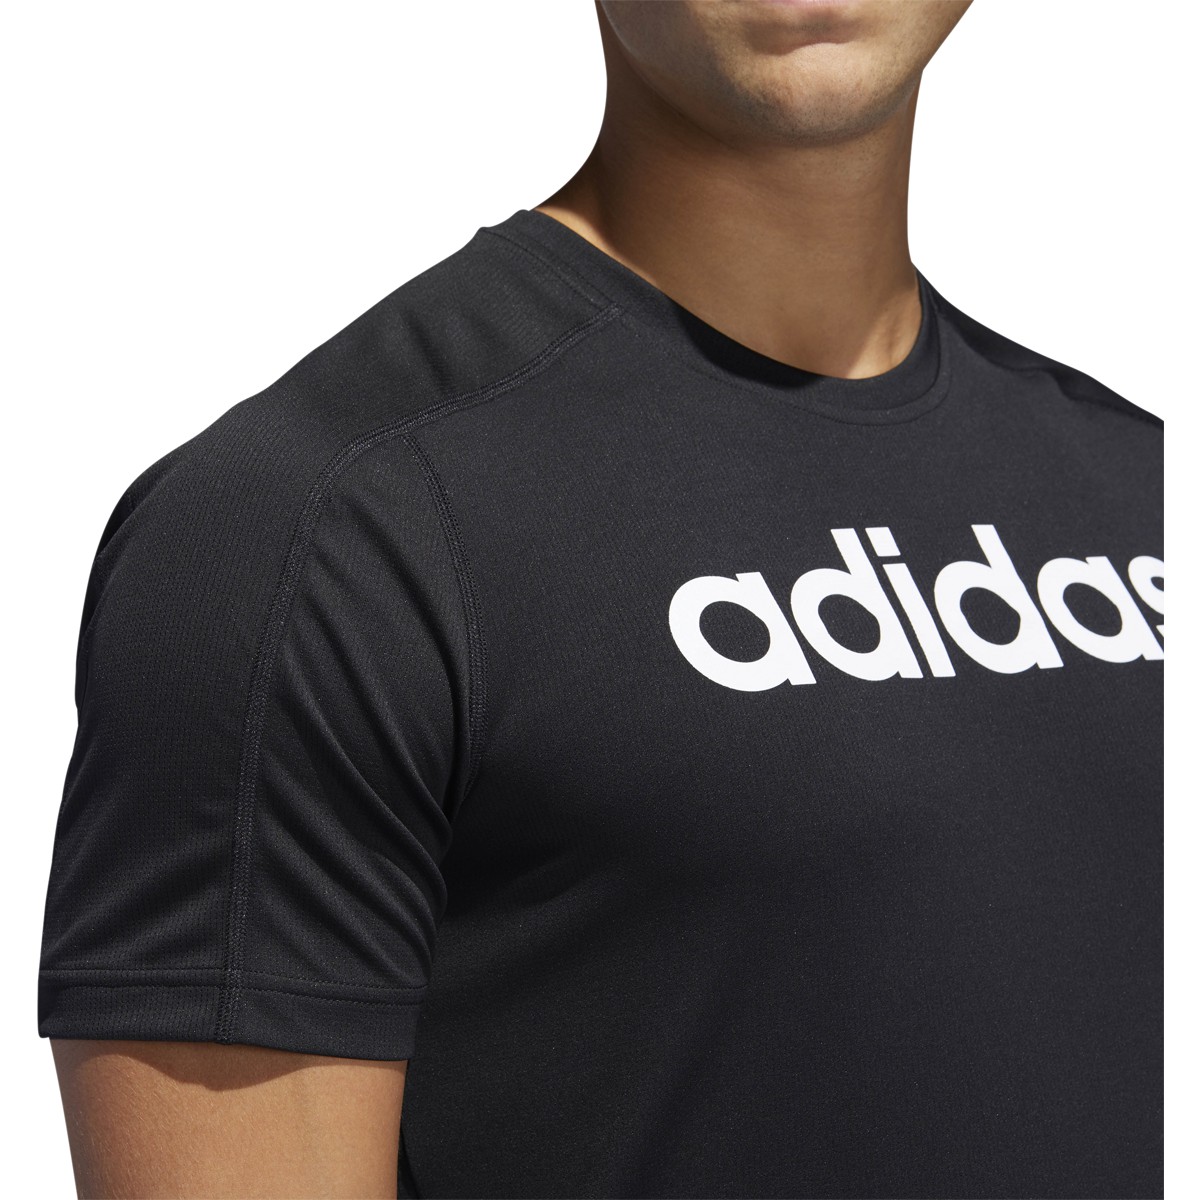 30 Minute Adidas Workout Tee for Fat Body